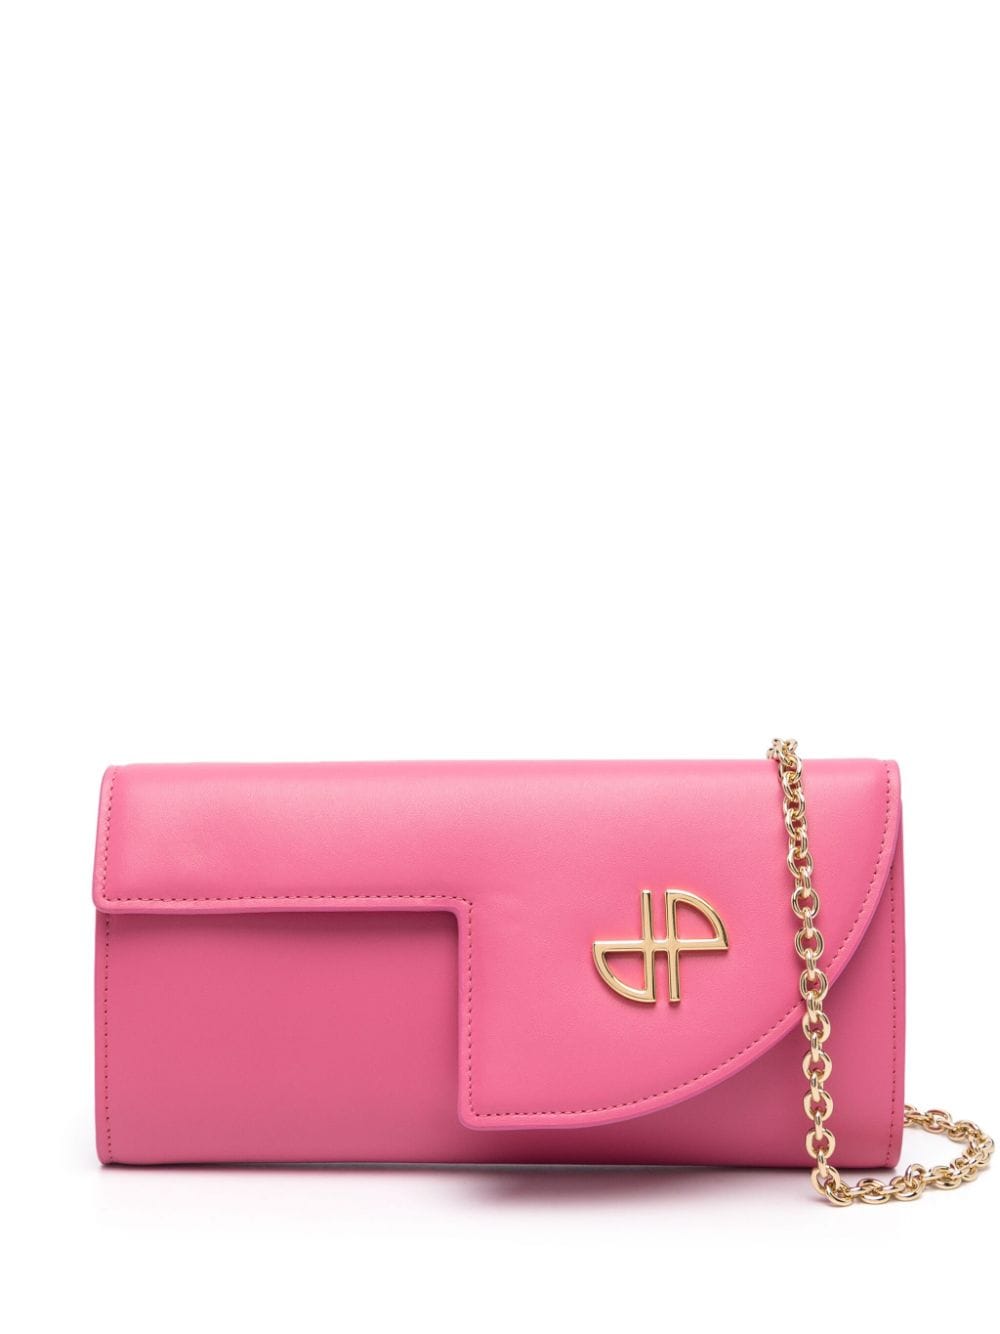 Patou Jp Chain-link Leather Clutch Bag In Pink